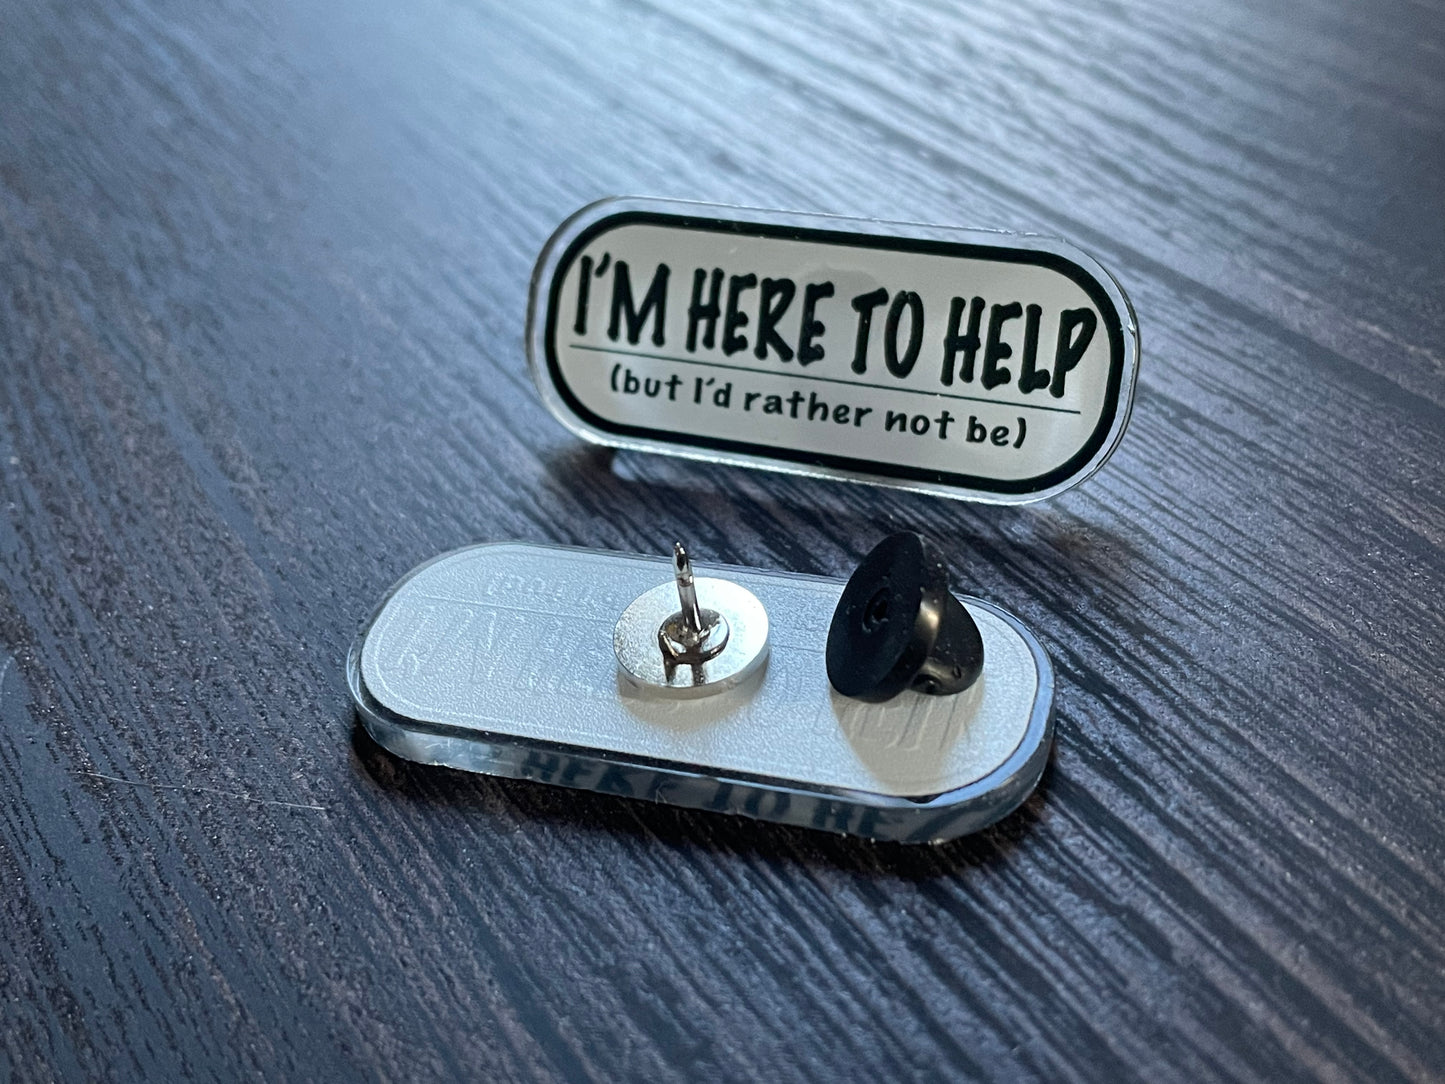 “I’m here to help, but I’d rather not be” Pin